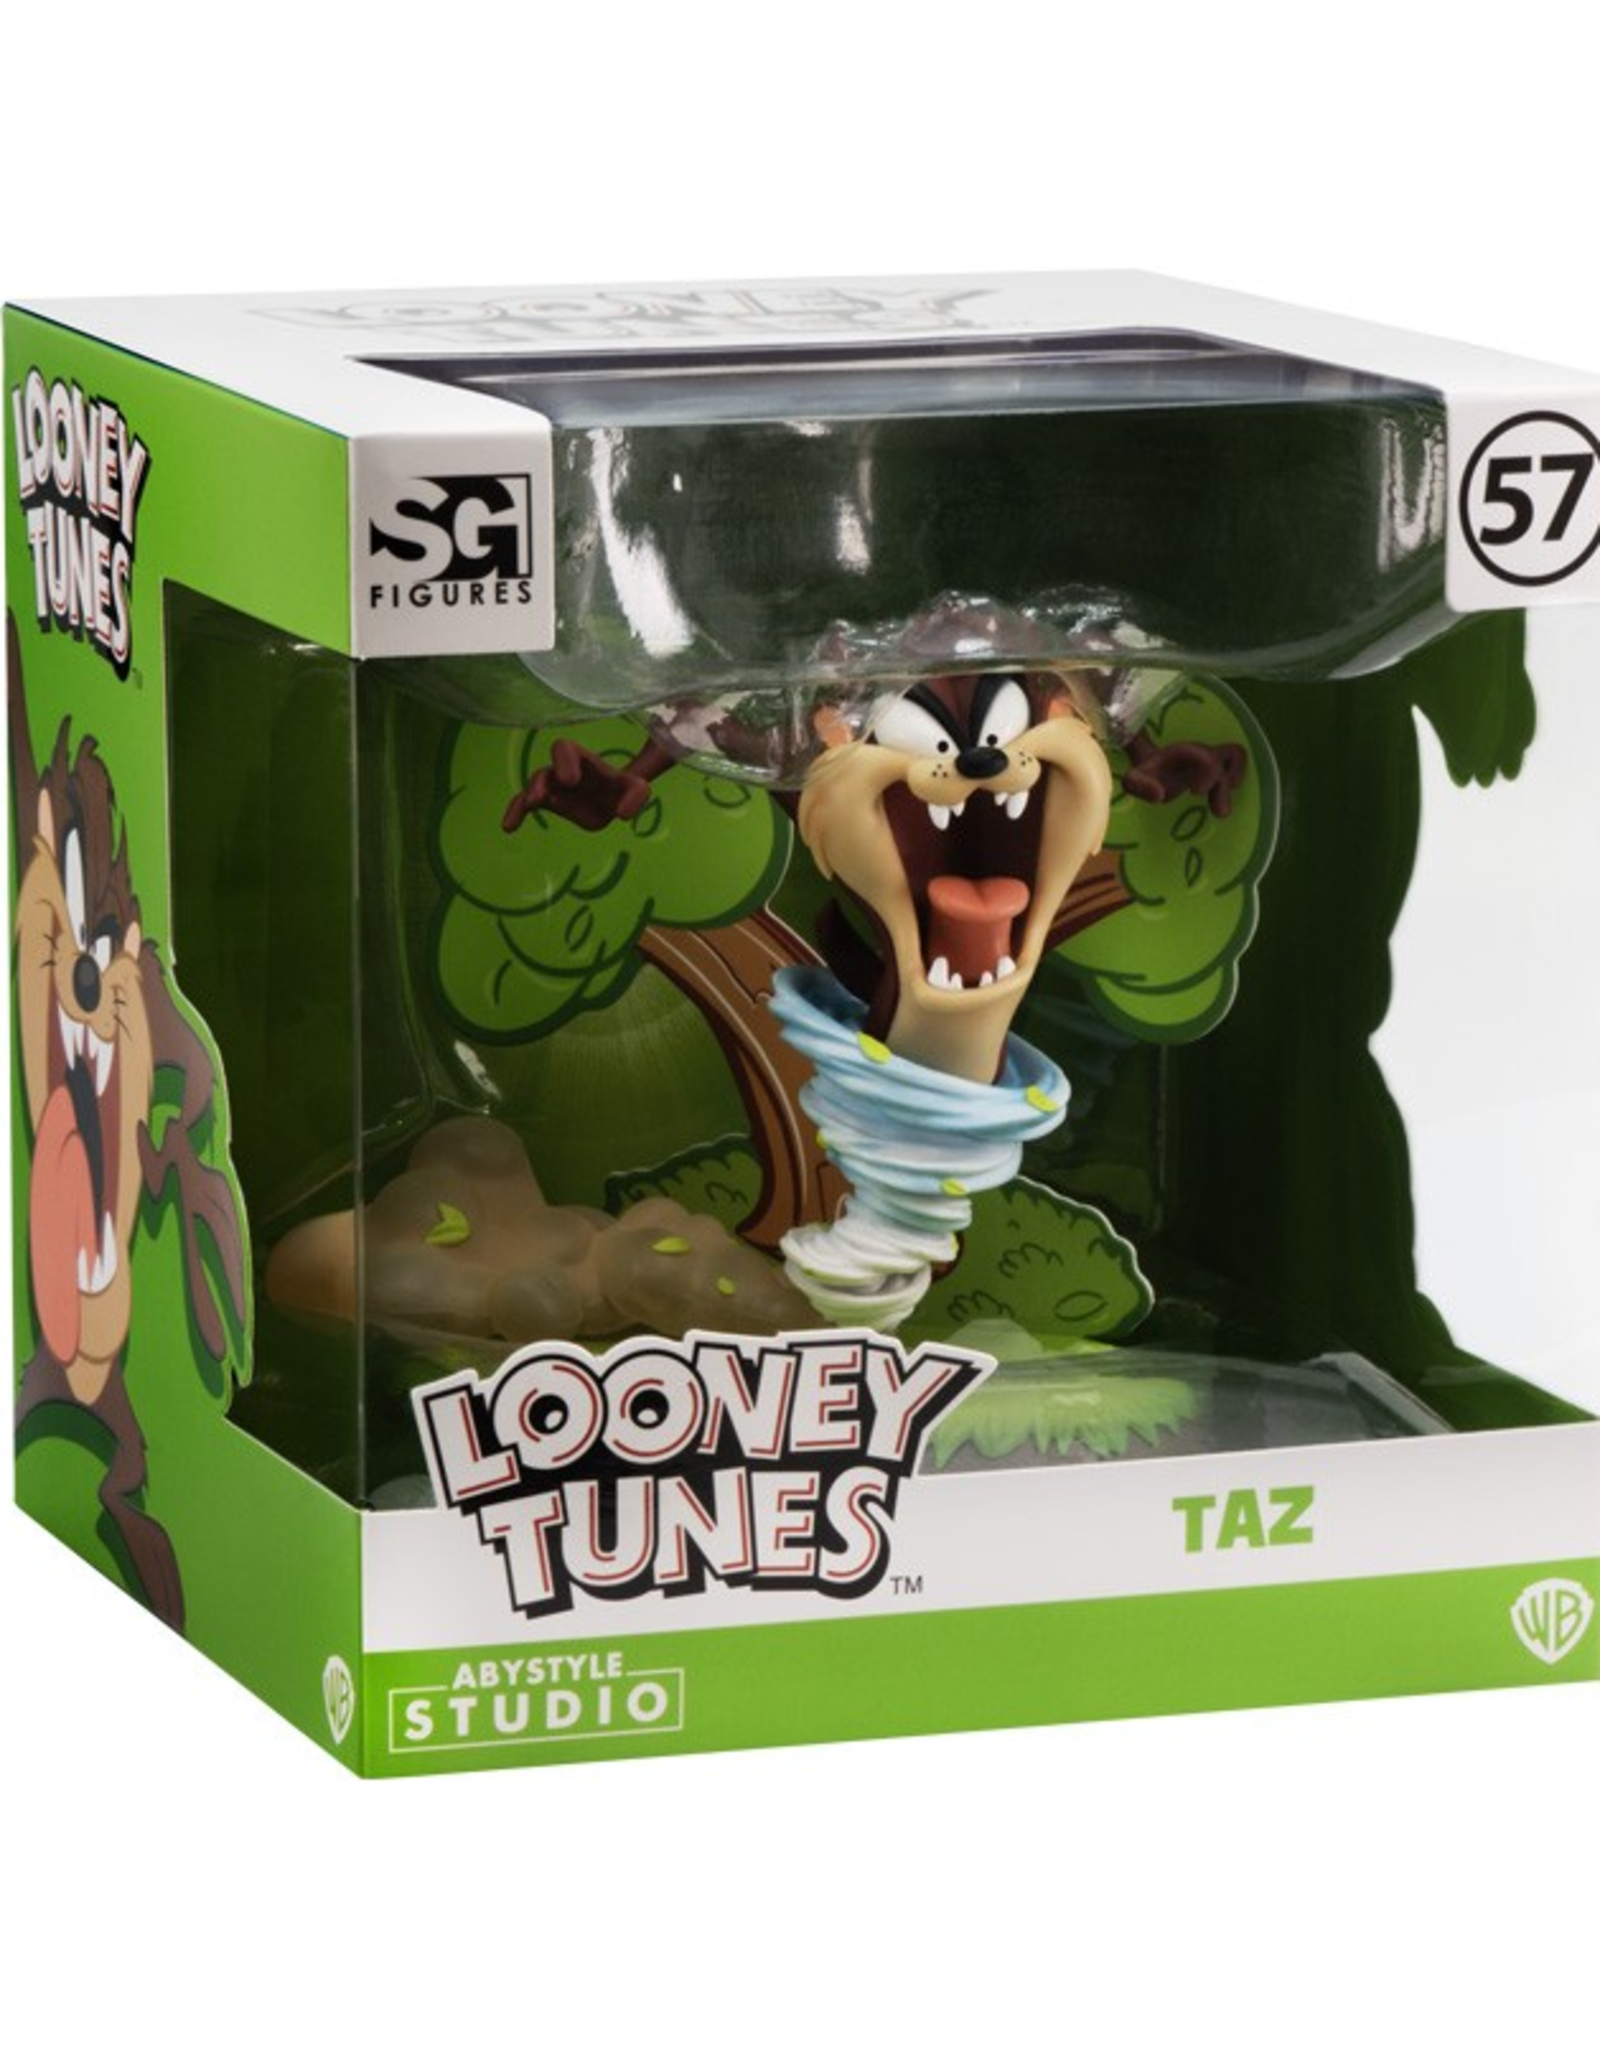 ABYSTYLE SG Figures:  Looney Tunes - Taz Figurine